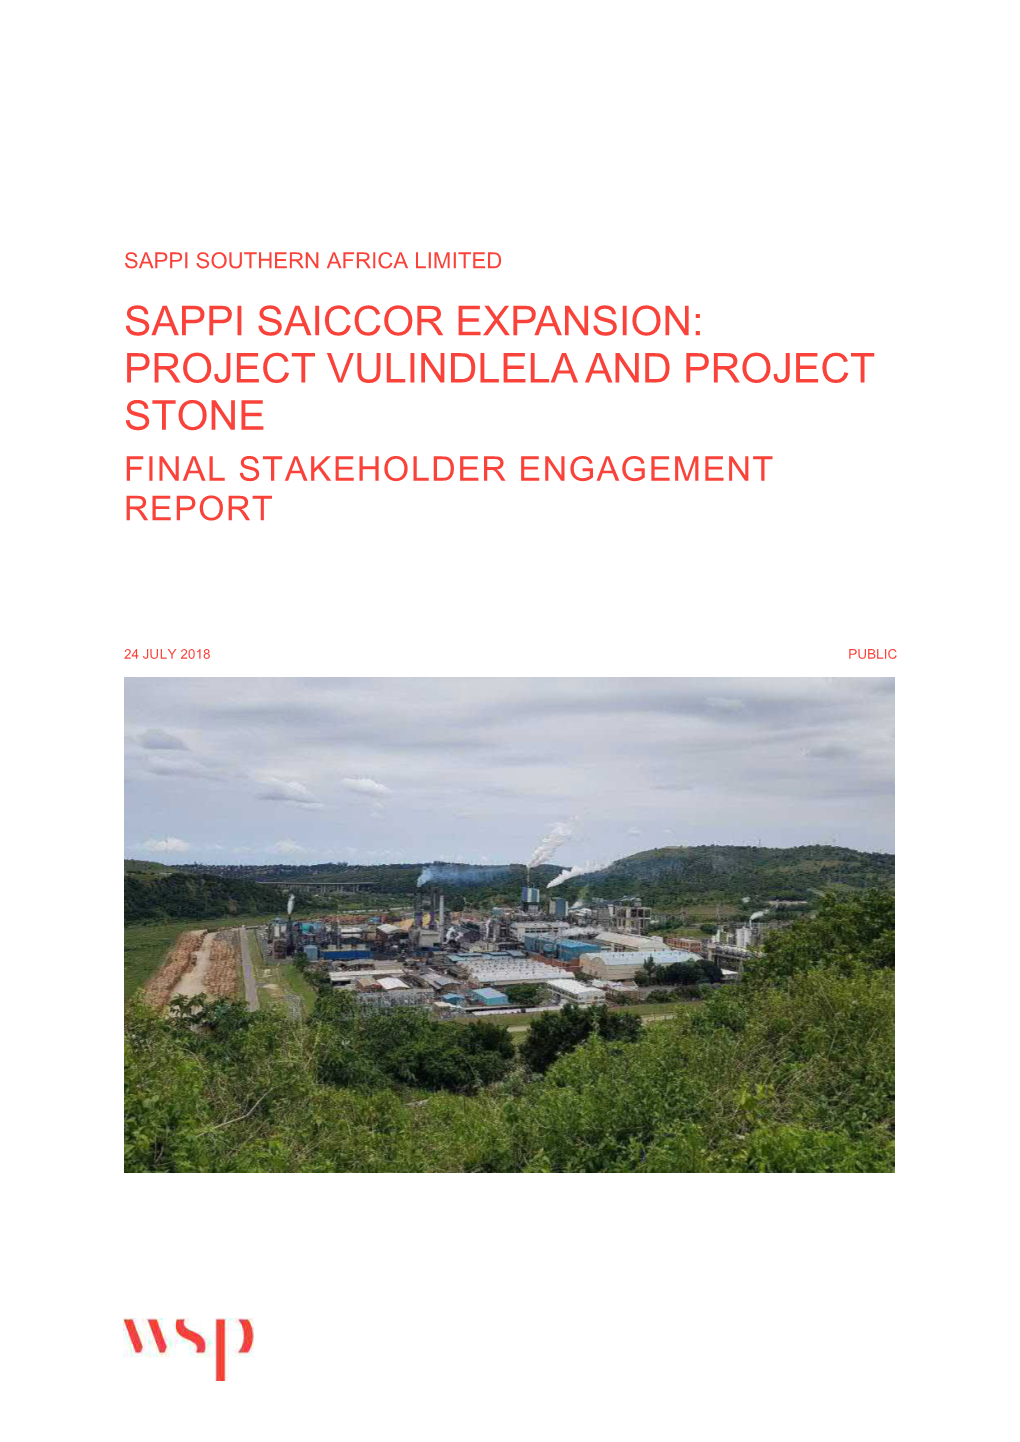 Sappi Saiccor Expansion: Project Vulindlela and Project Stone Final Stakeholder Engagement Report